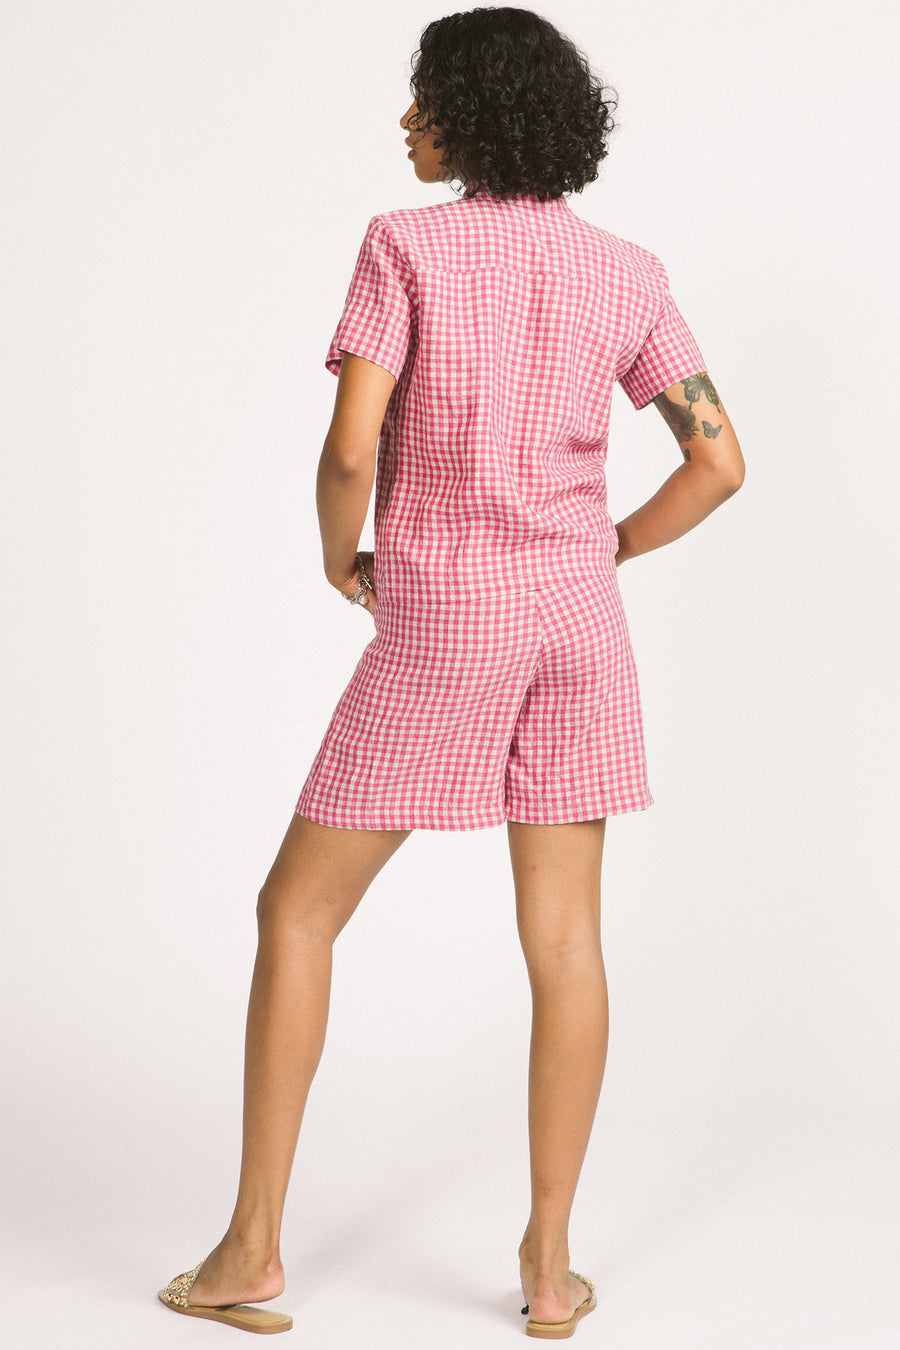 Back view of woman wearing a pink and white linen gingham button up Elodie blouse by Allison Wonderland. 